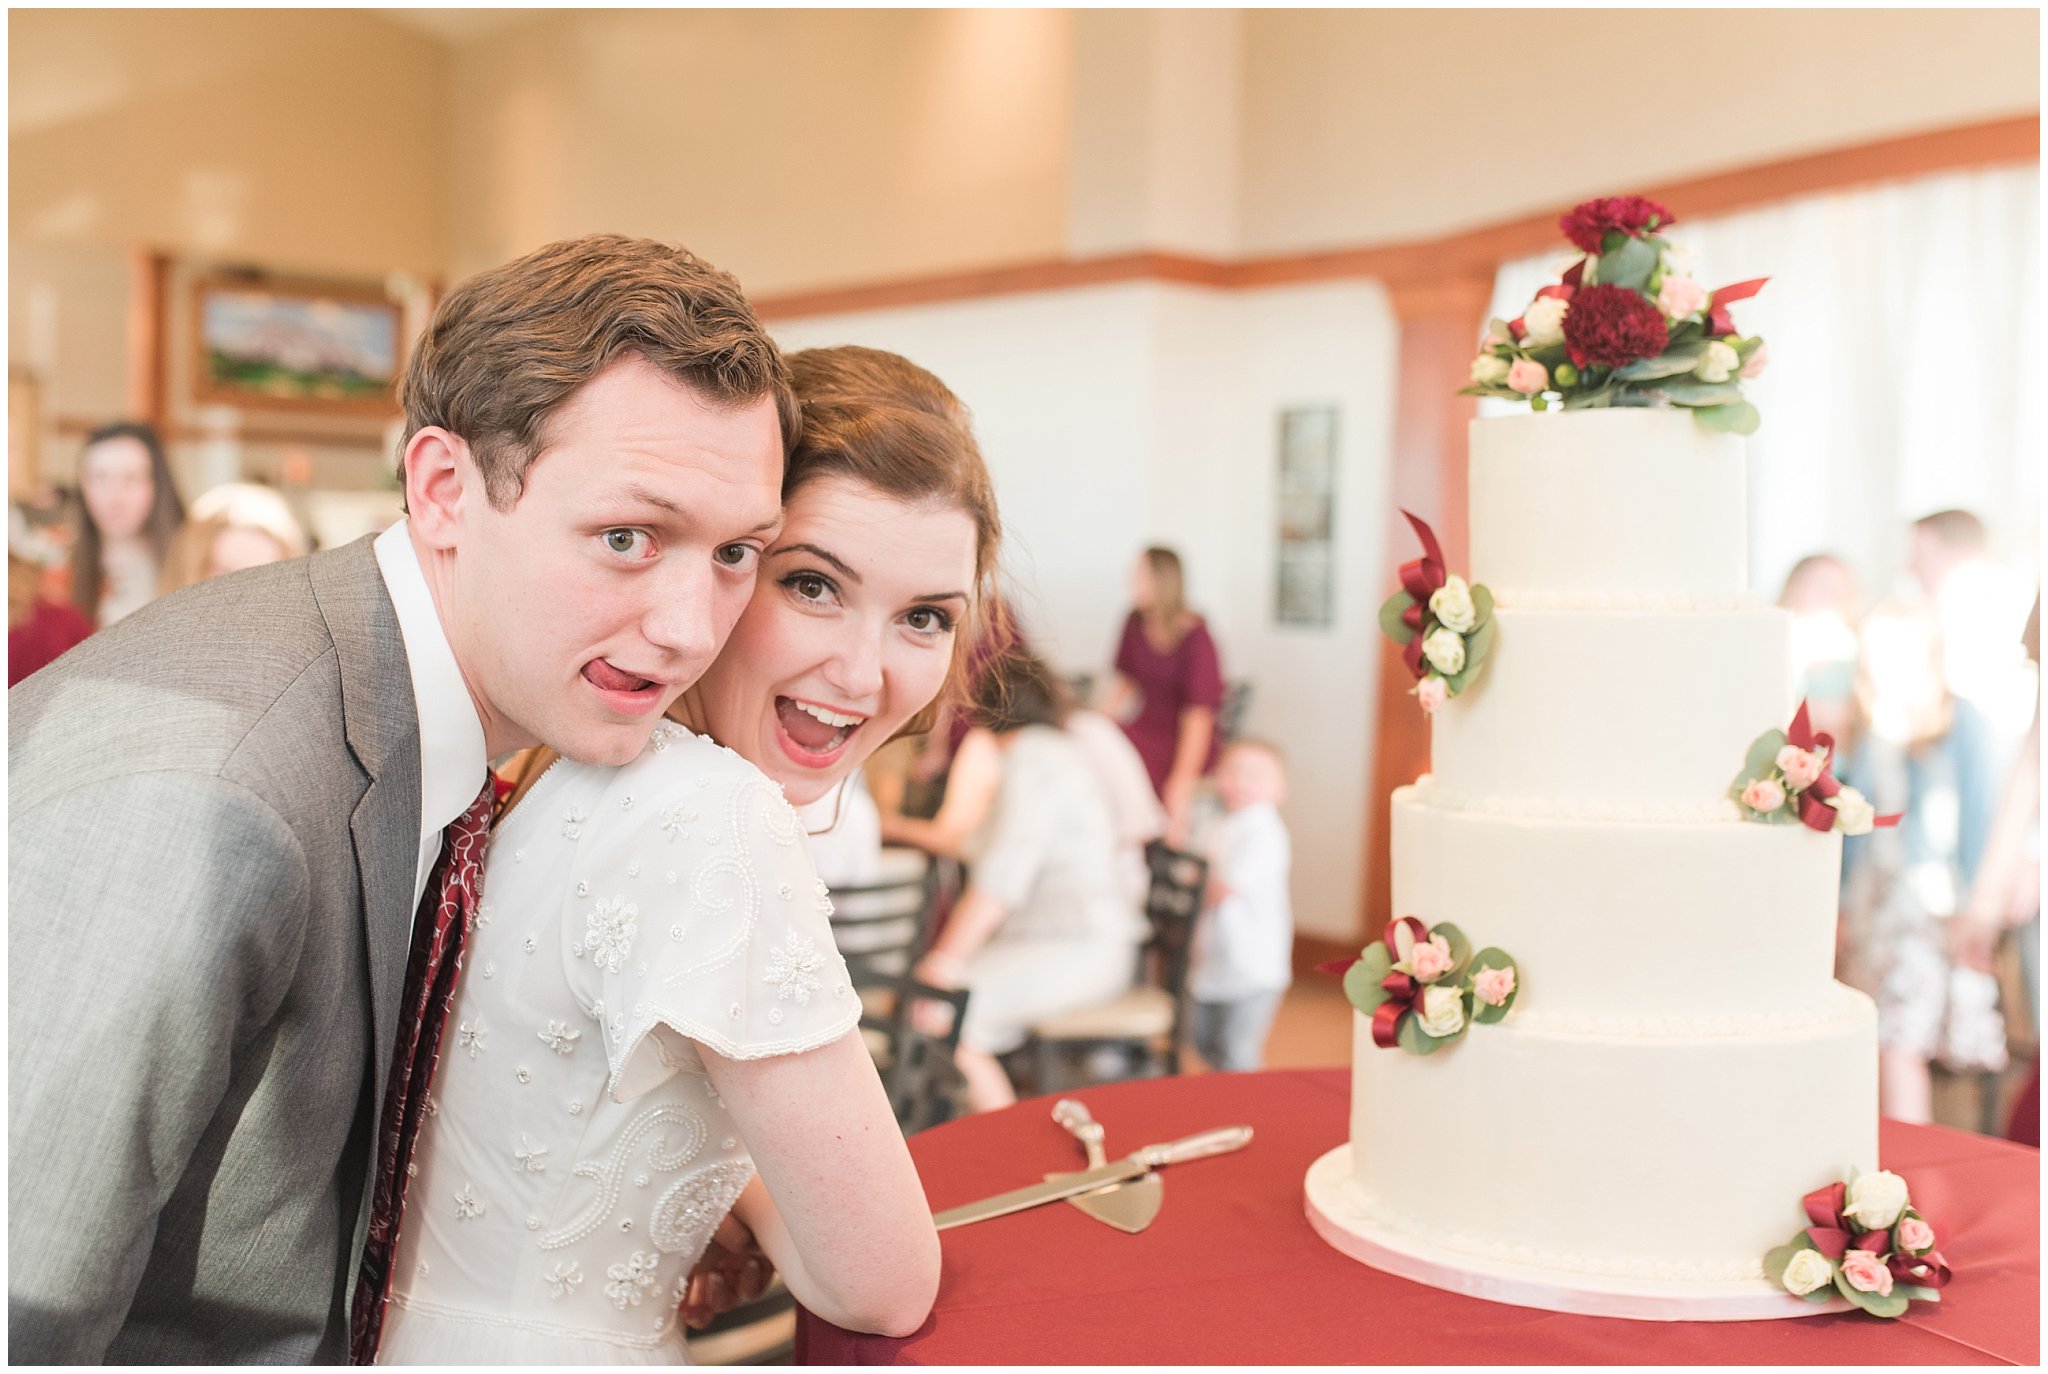 Cake cutting at reception | Grey, Burgundy, and Gold Wedding | Draper Temple and South Mountain Wedding | Utah Wedding Photographers | Jessie and Dallin Photography